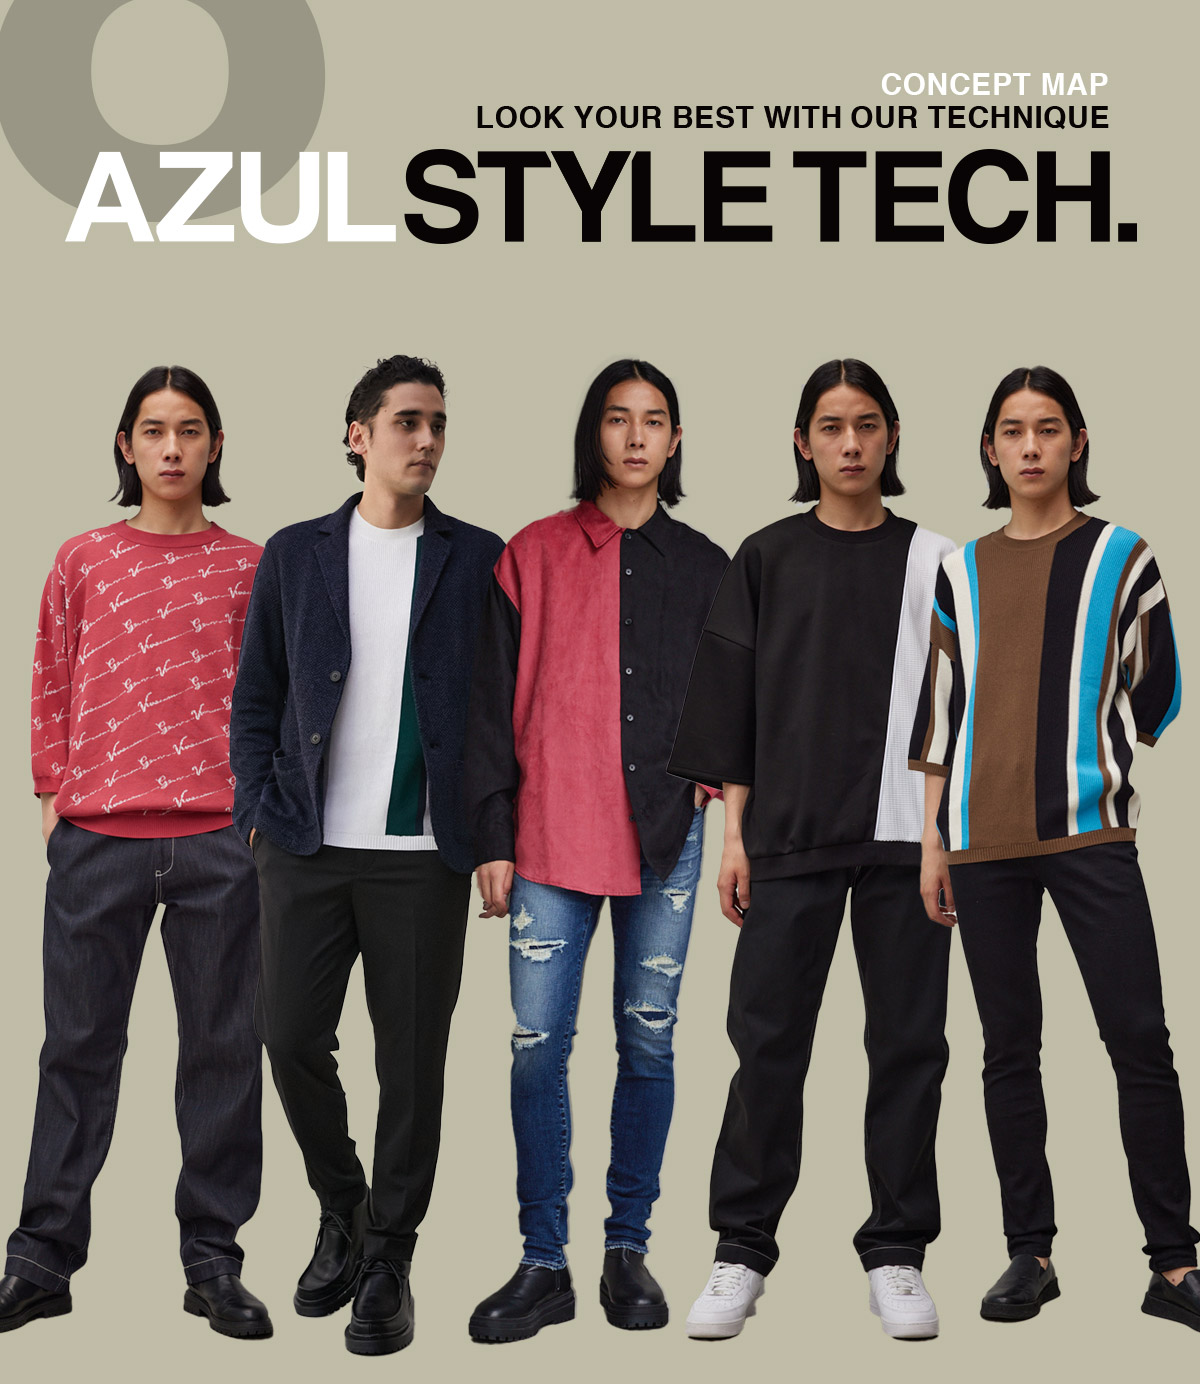 LOOK YOUR BEST WITH OUR TECHNIQUE AZUL STYLE TECH. 8 for MEN